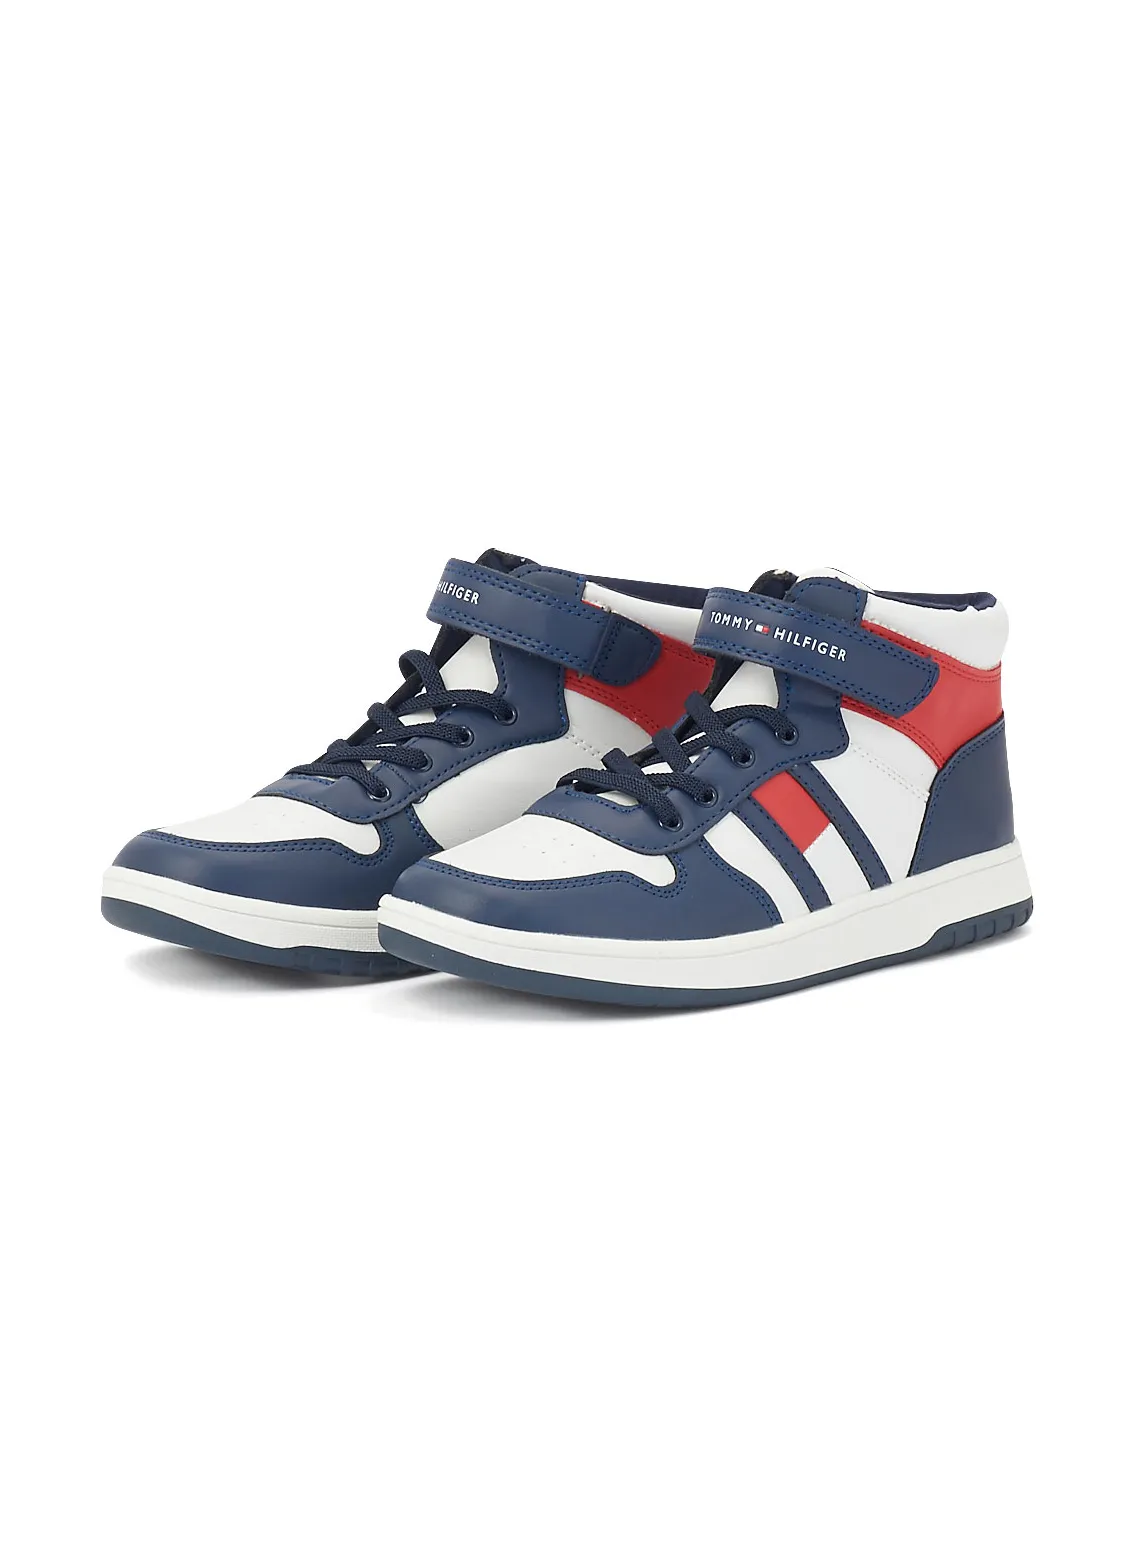 High TOMMY up/Velcro - Sneakers | Top Lace Blue/White/Red Youth Choice+Attitude HILFIGER